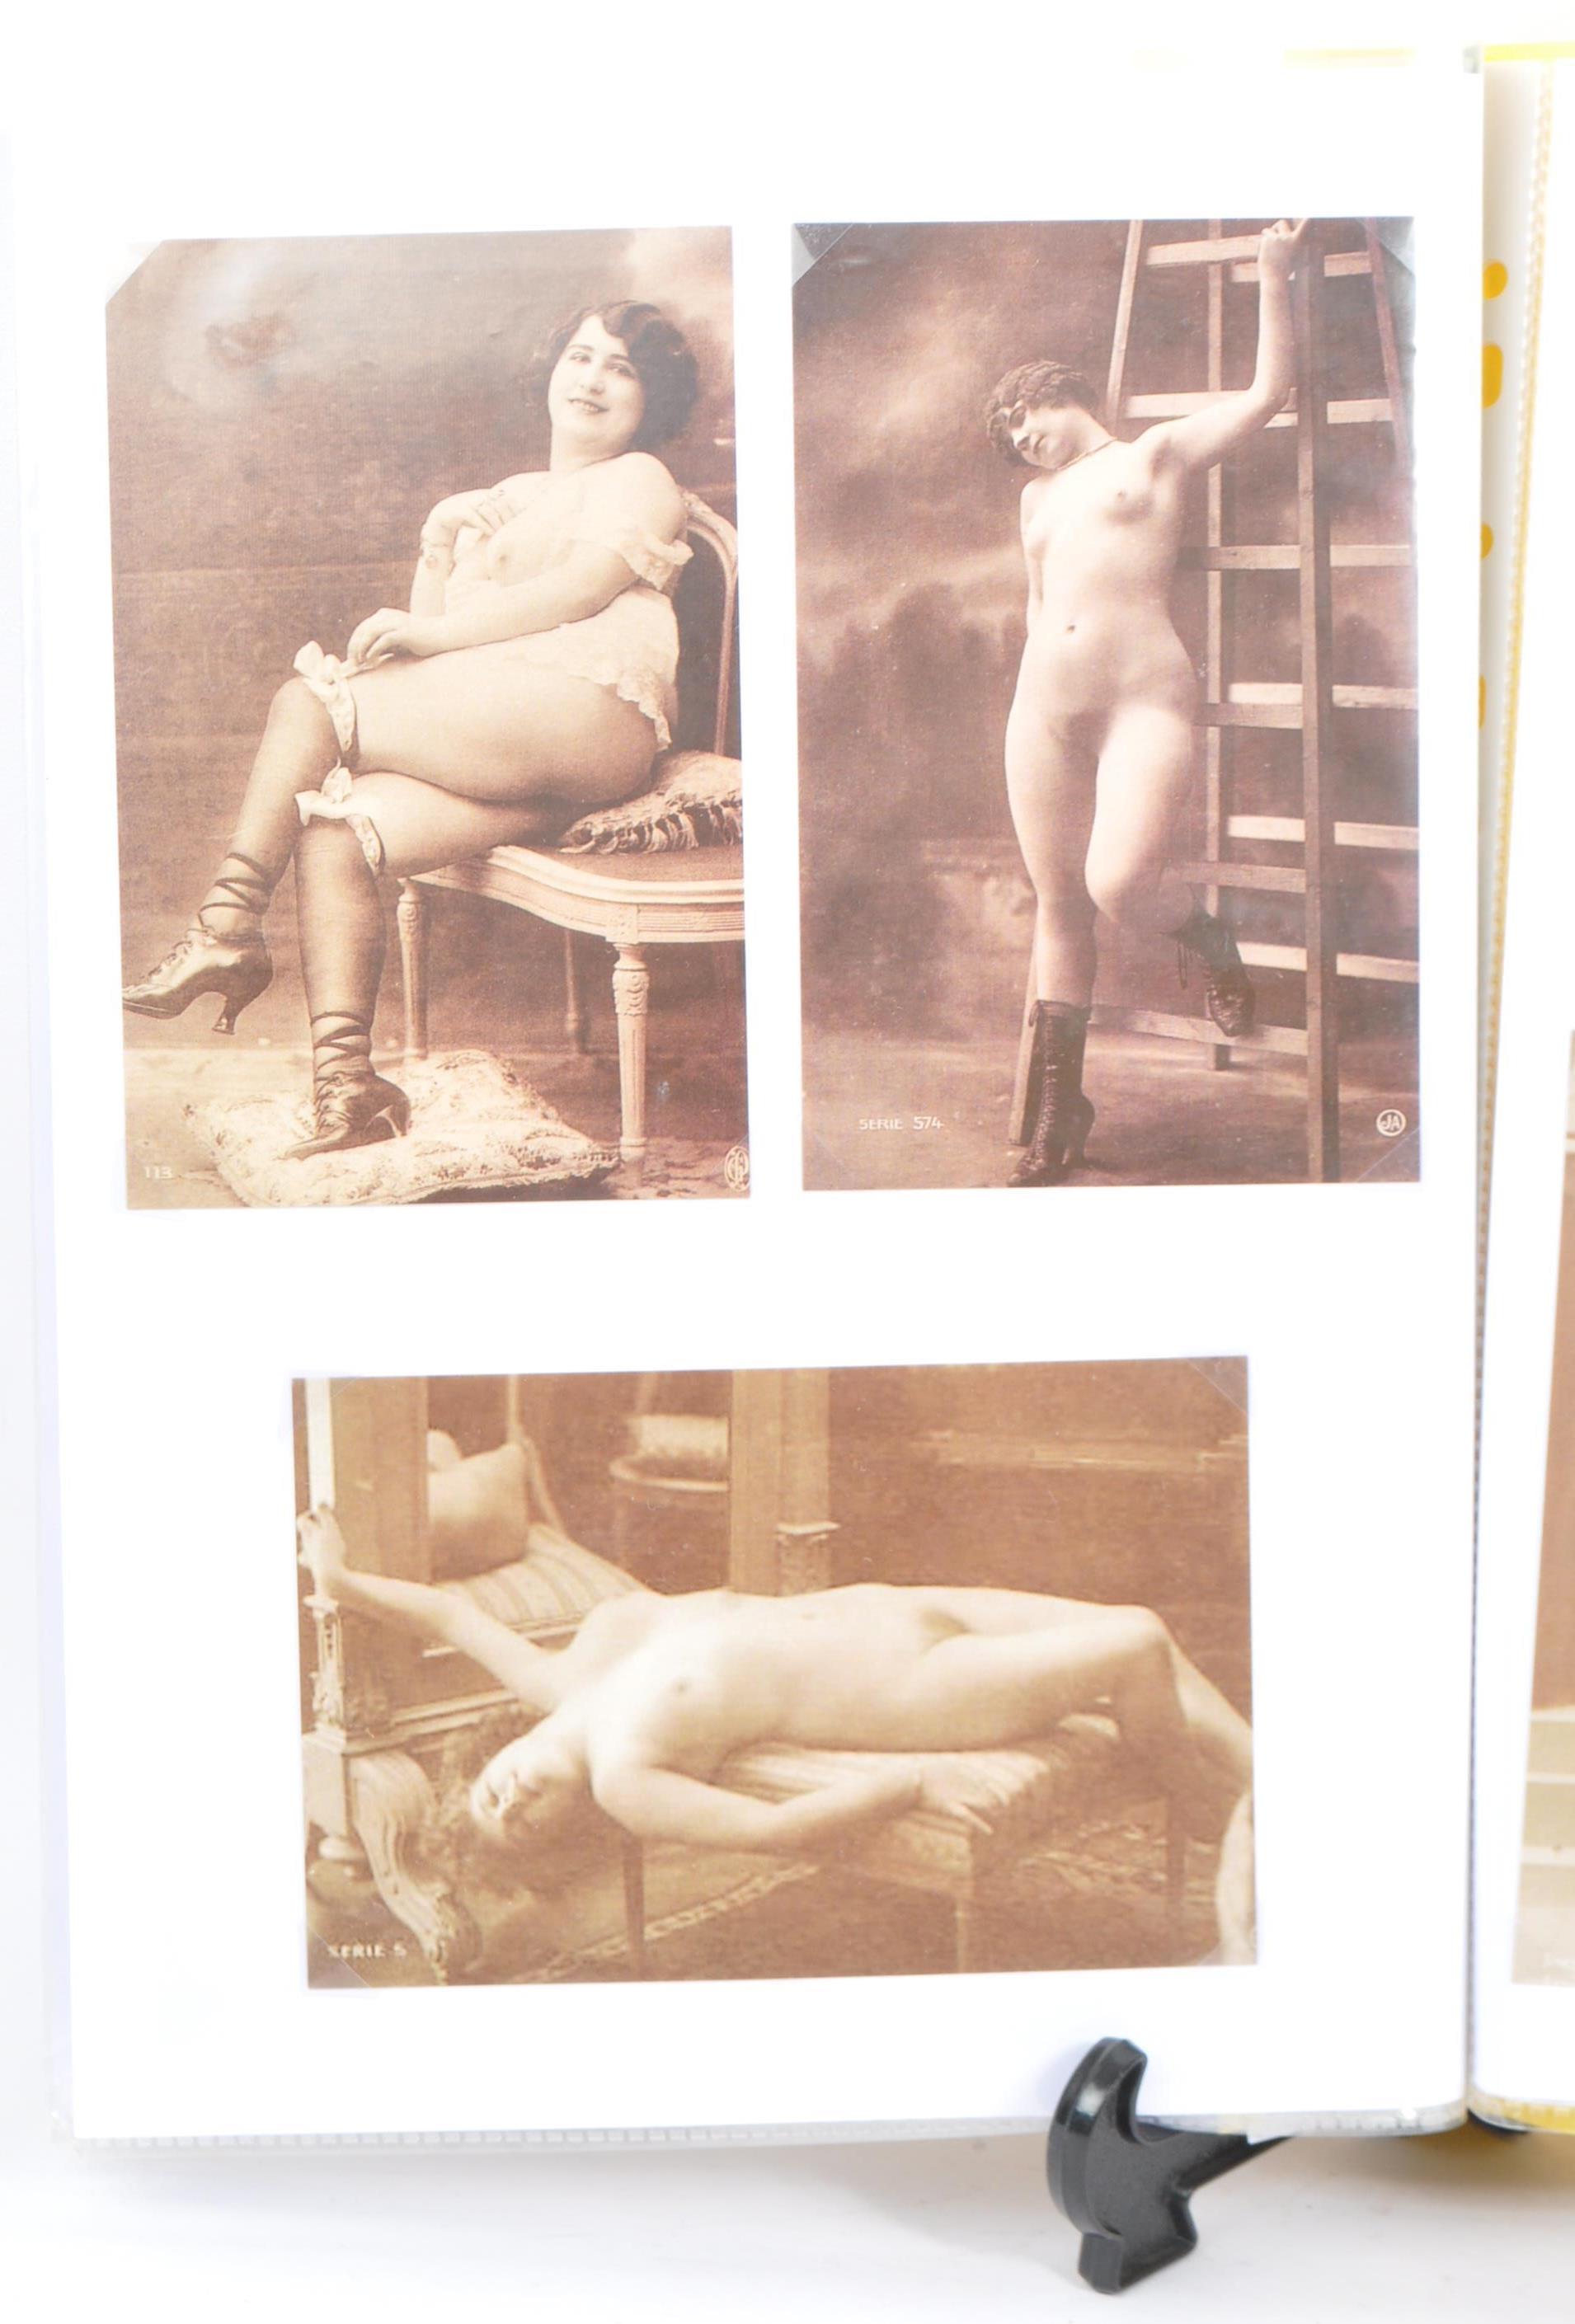 COLLECTION OF 20TH CENTURY FRENCH EROTIC NUDE POSTCARDS - Image 4 of 9